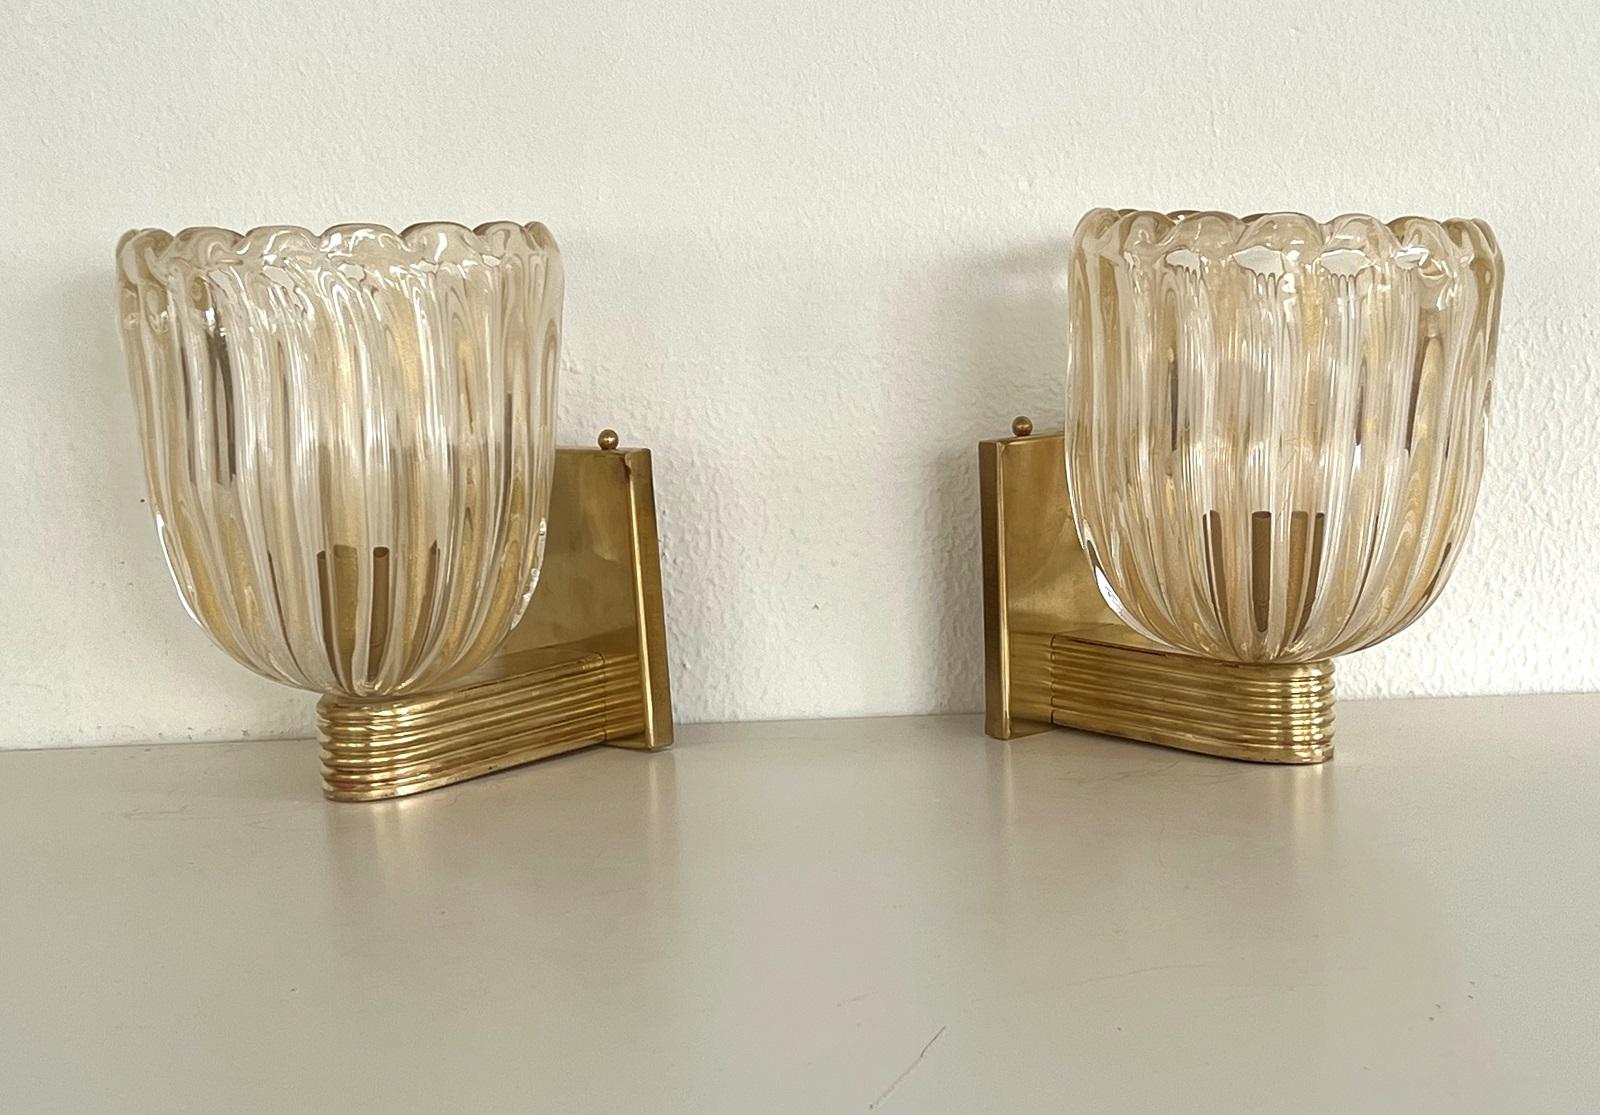 Italian Brass and Murano Glass Wall Lights or Sconces in Art Deco Style, 1990s For Sale 8